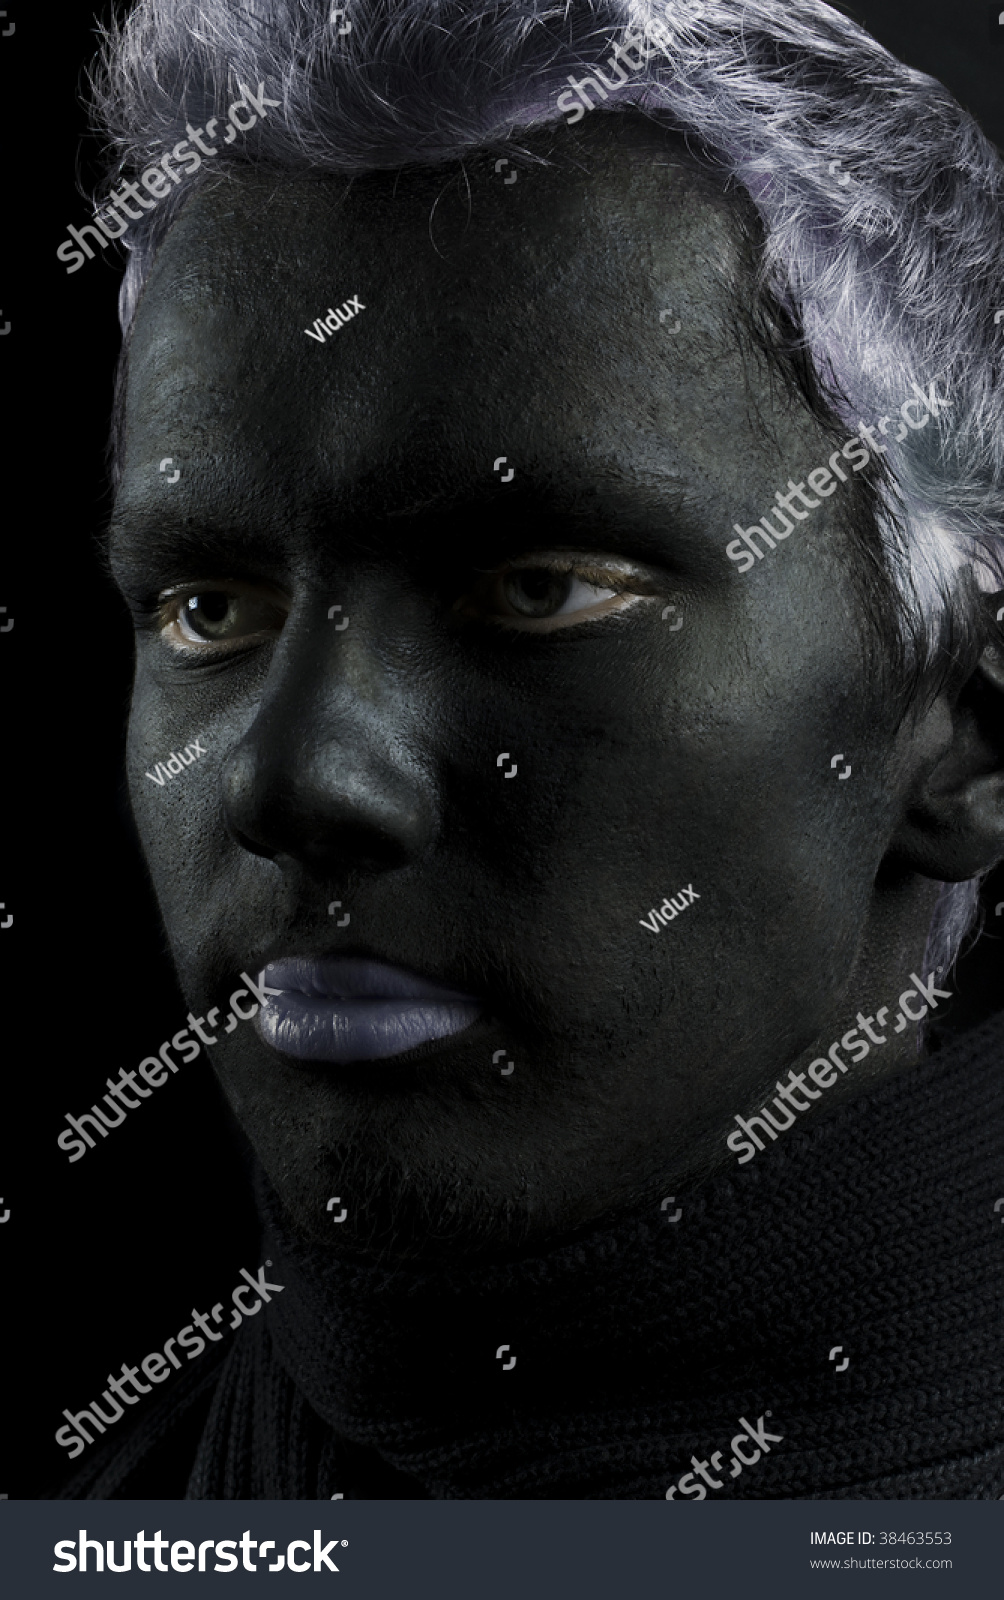 Man With Black Face Stock Photo 38463553 : Shutterstock